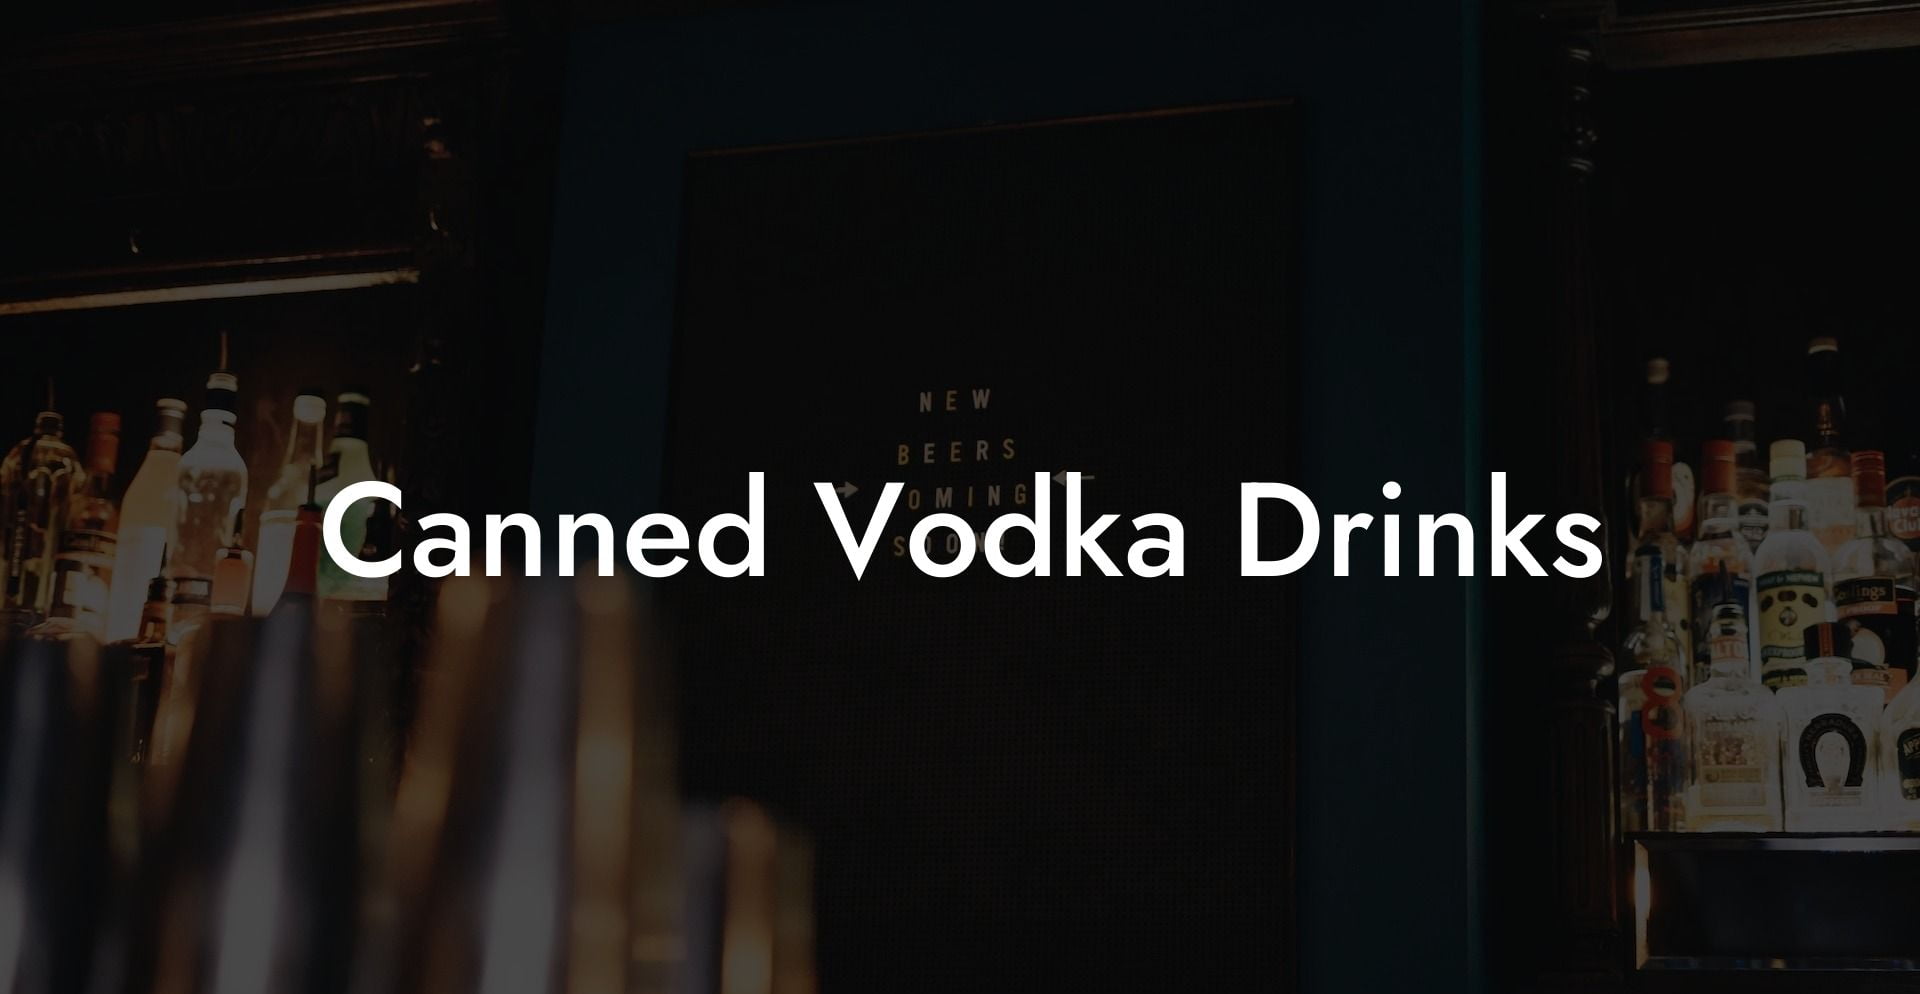 Canned Vodka Drinks